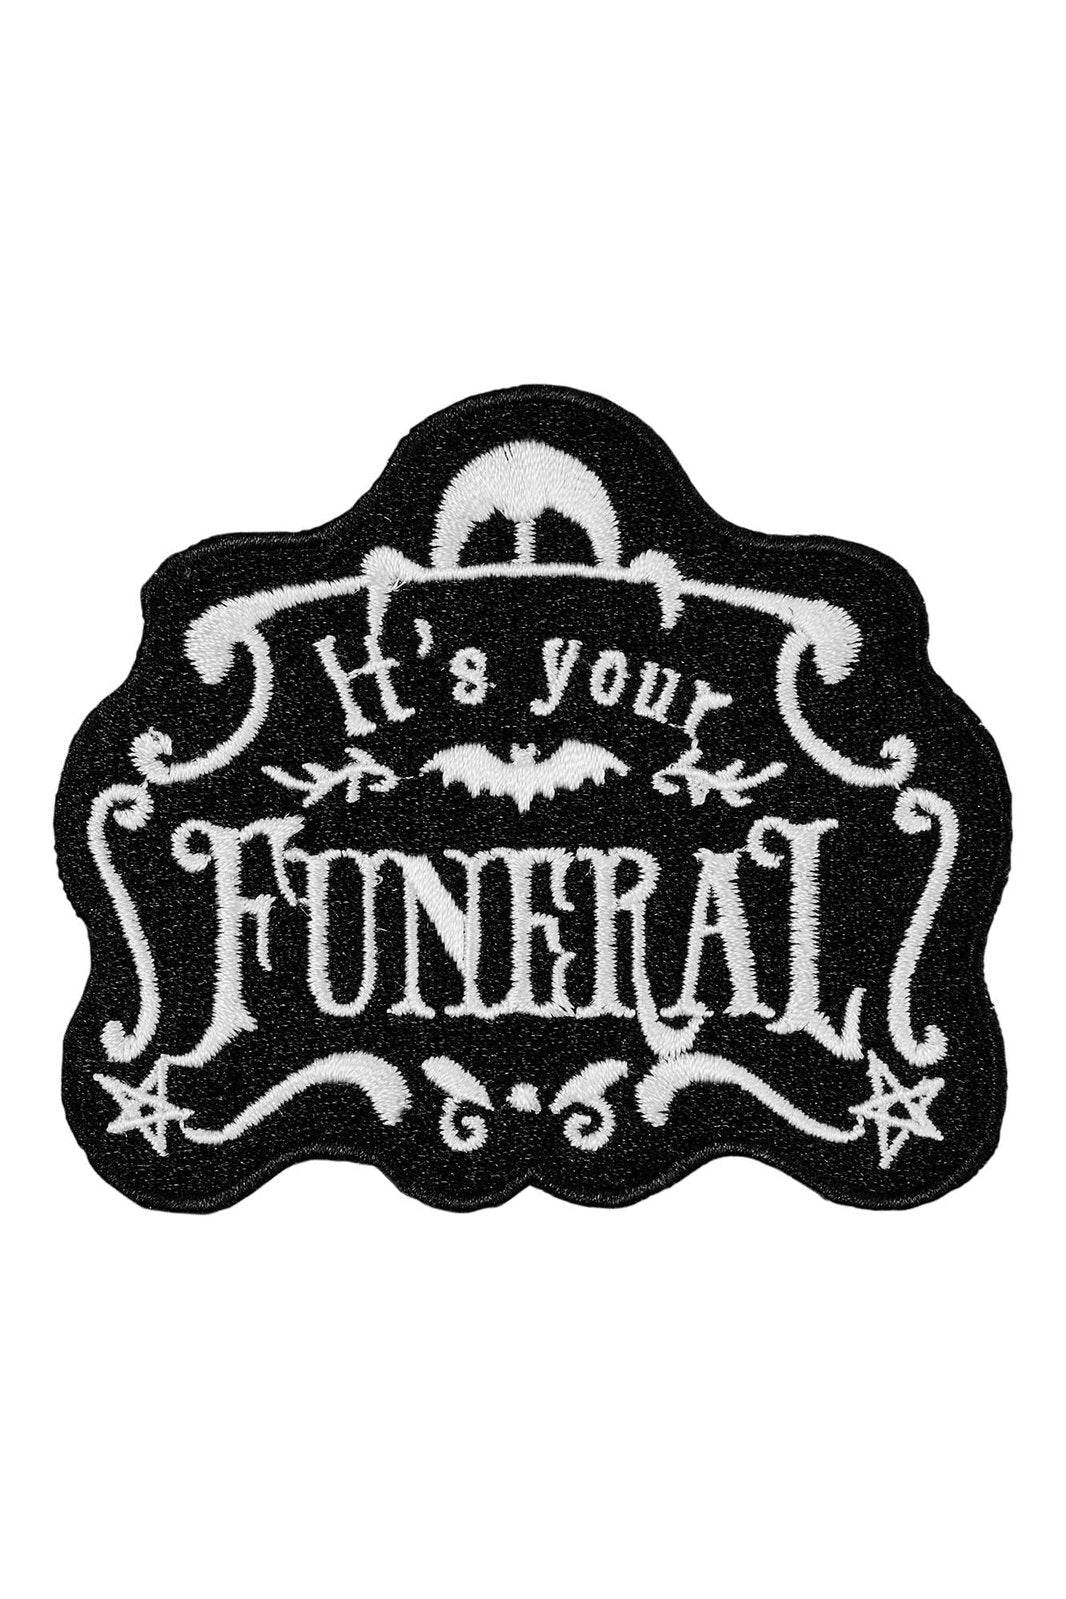 Funeral Patch